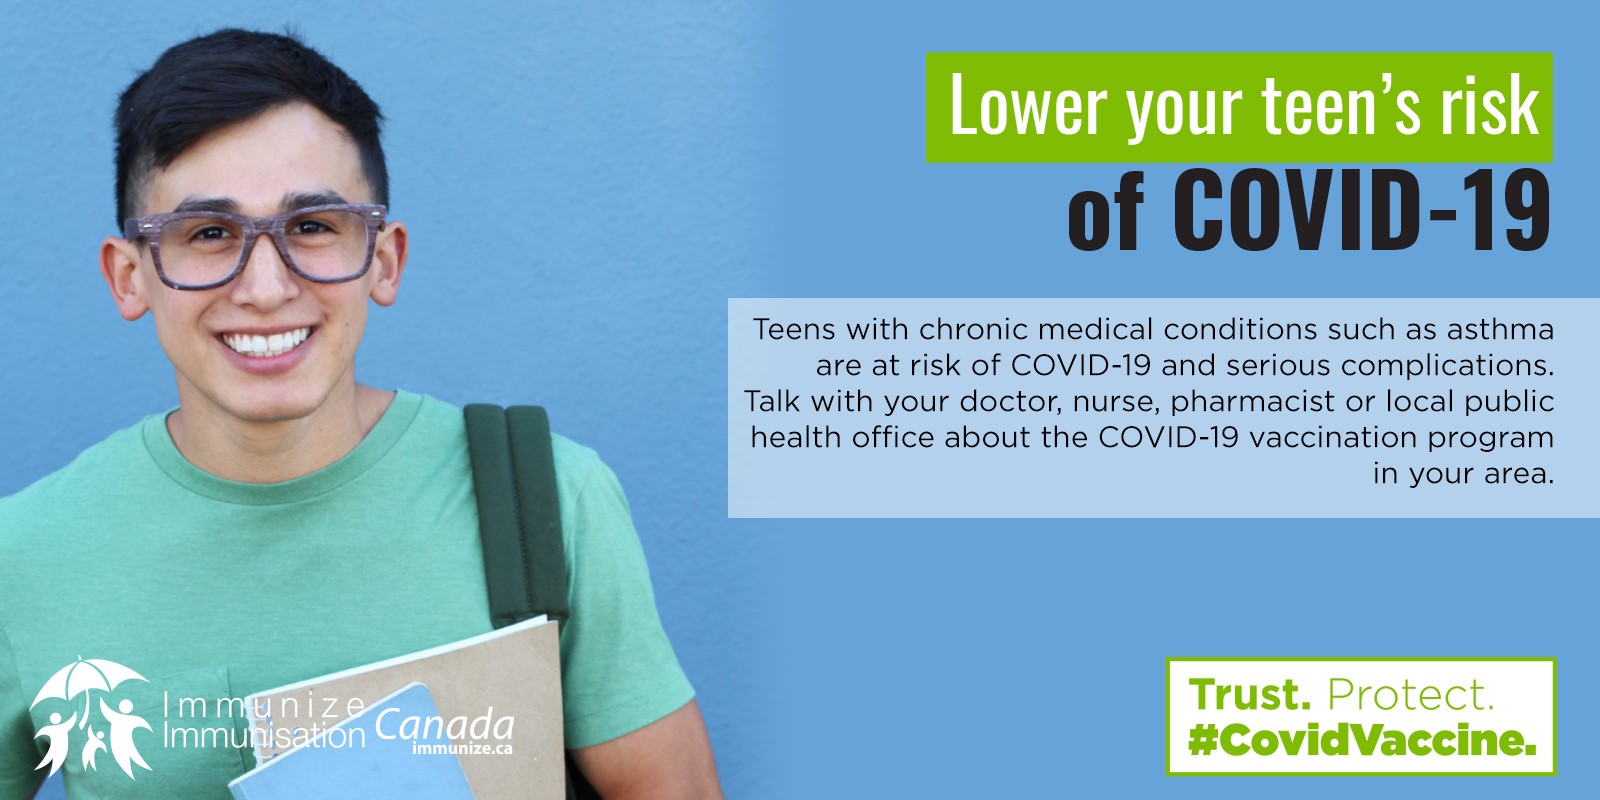 Lower your teen's risk of COVID-19.